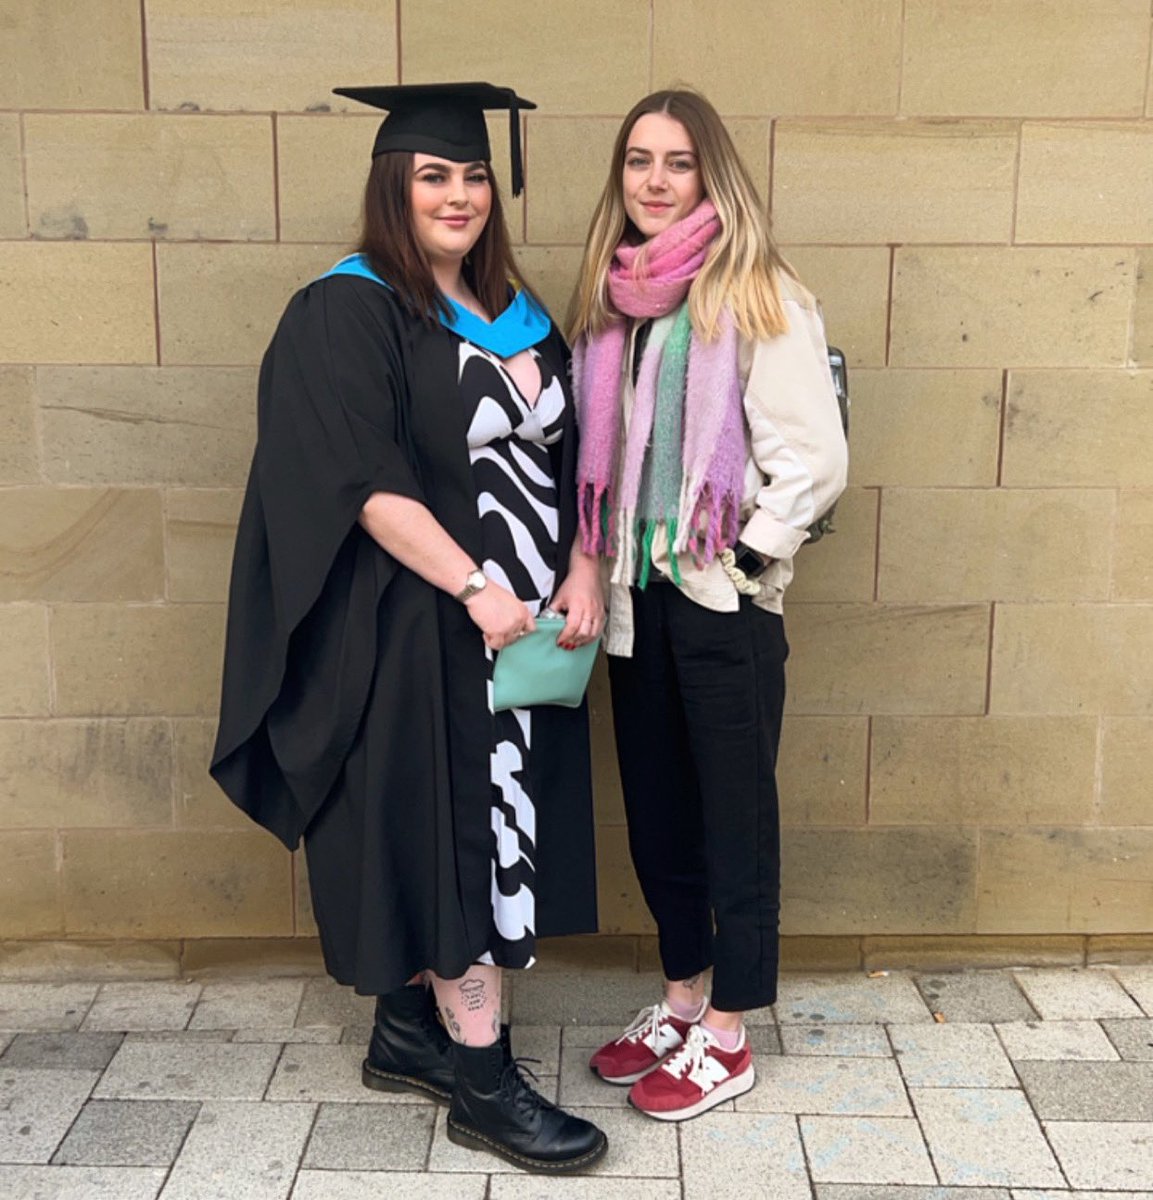 Proud big sister moment today seeing my sister graduate as a mental health nurse! We should have both been graduating as nurses today but instead (fingers crossed) I’ll be graduating as an OT this time next year 🫶🏽 #HudGrad #ProudBigSister